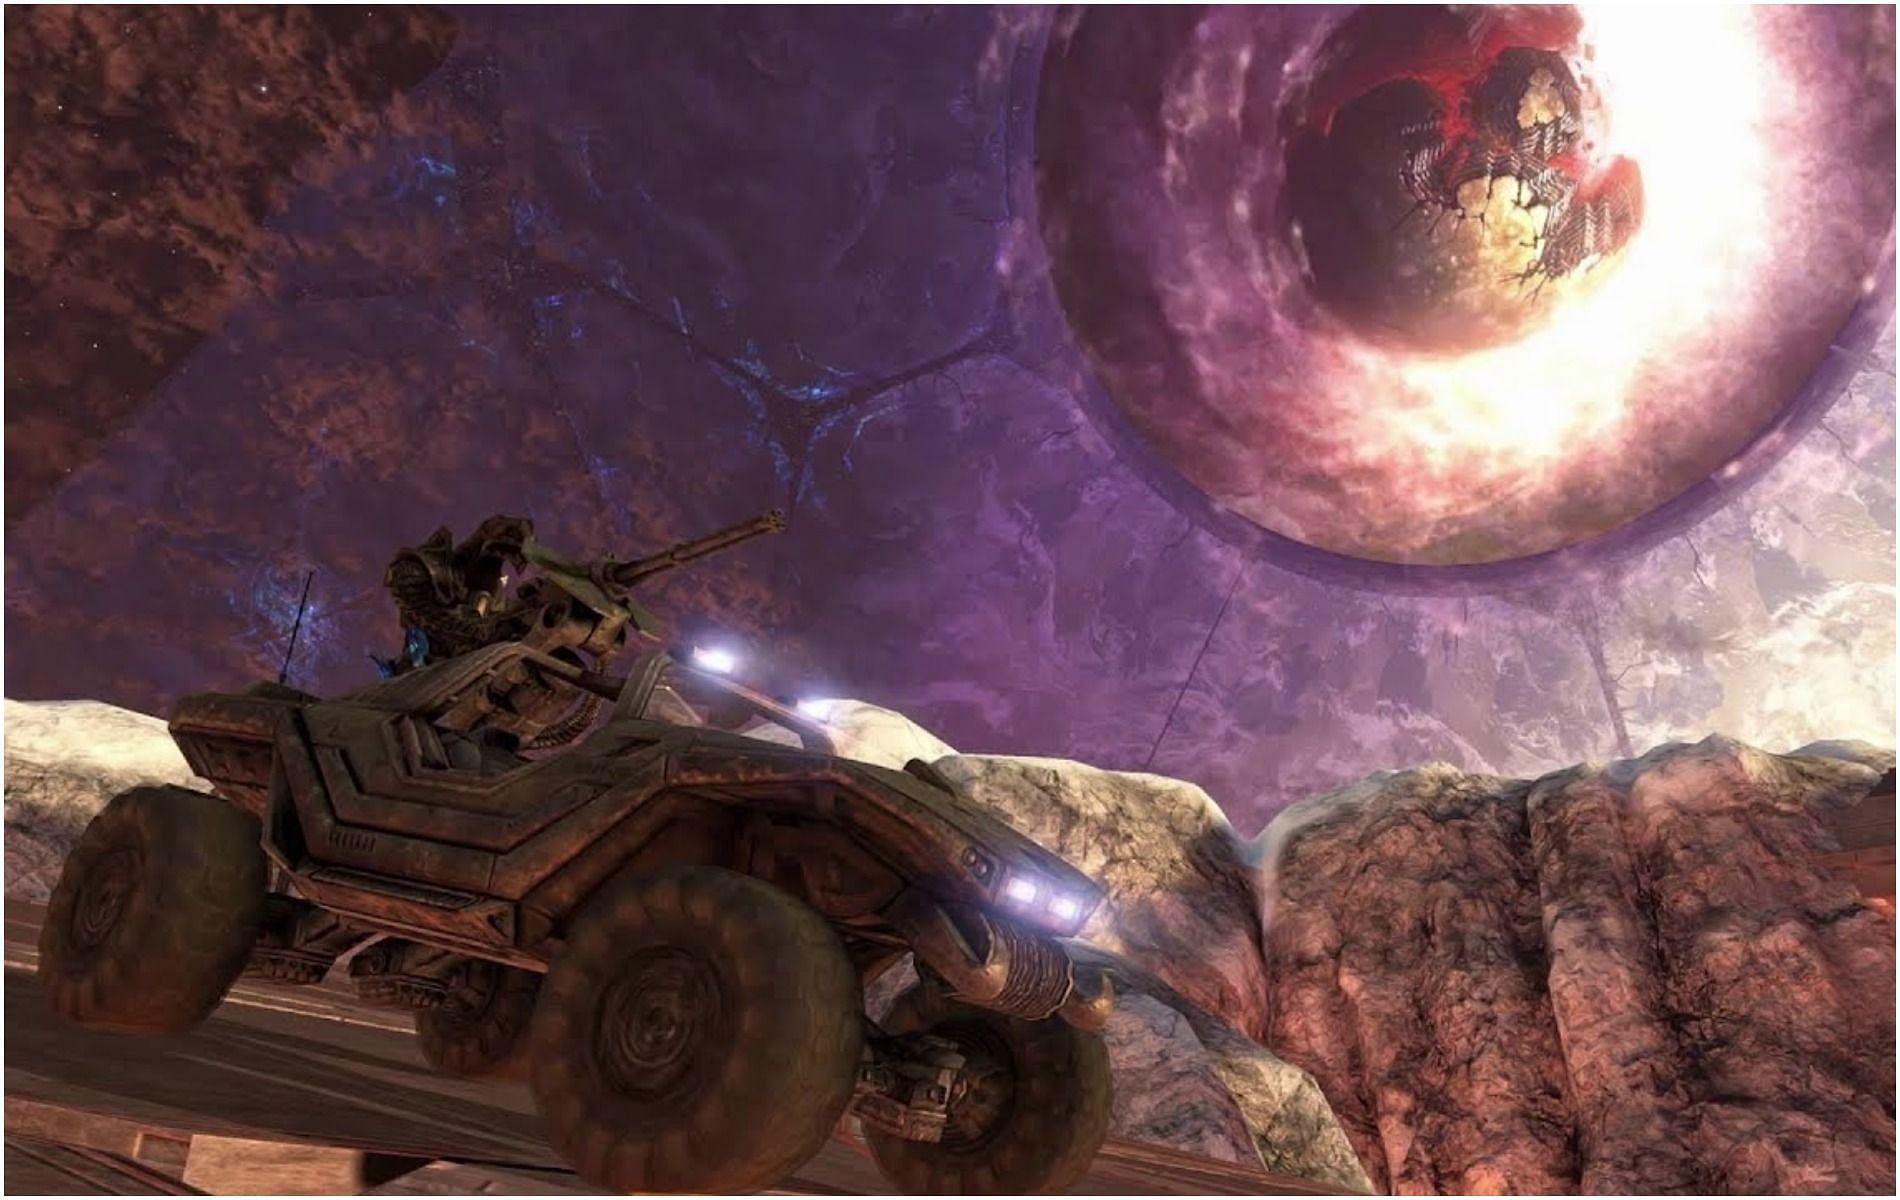 The Warthog Run from Halo 3 (Image via Bungie)